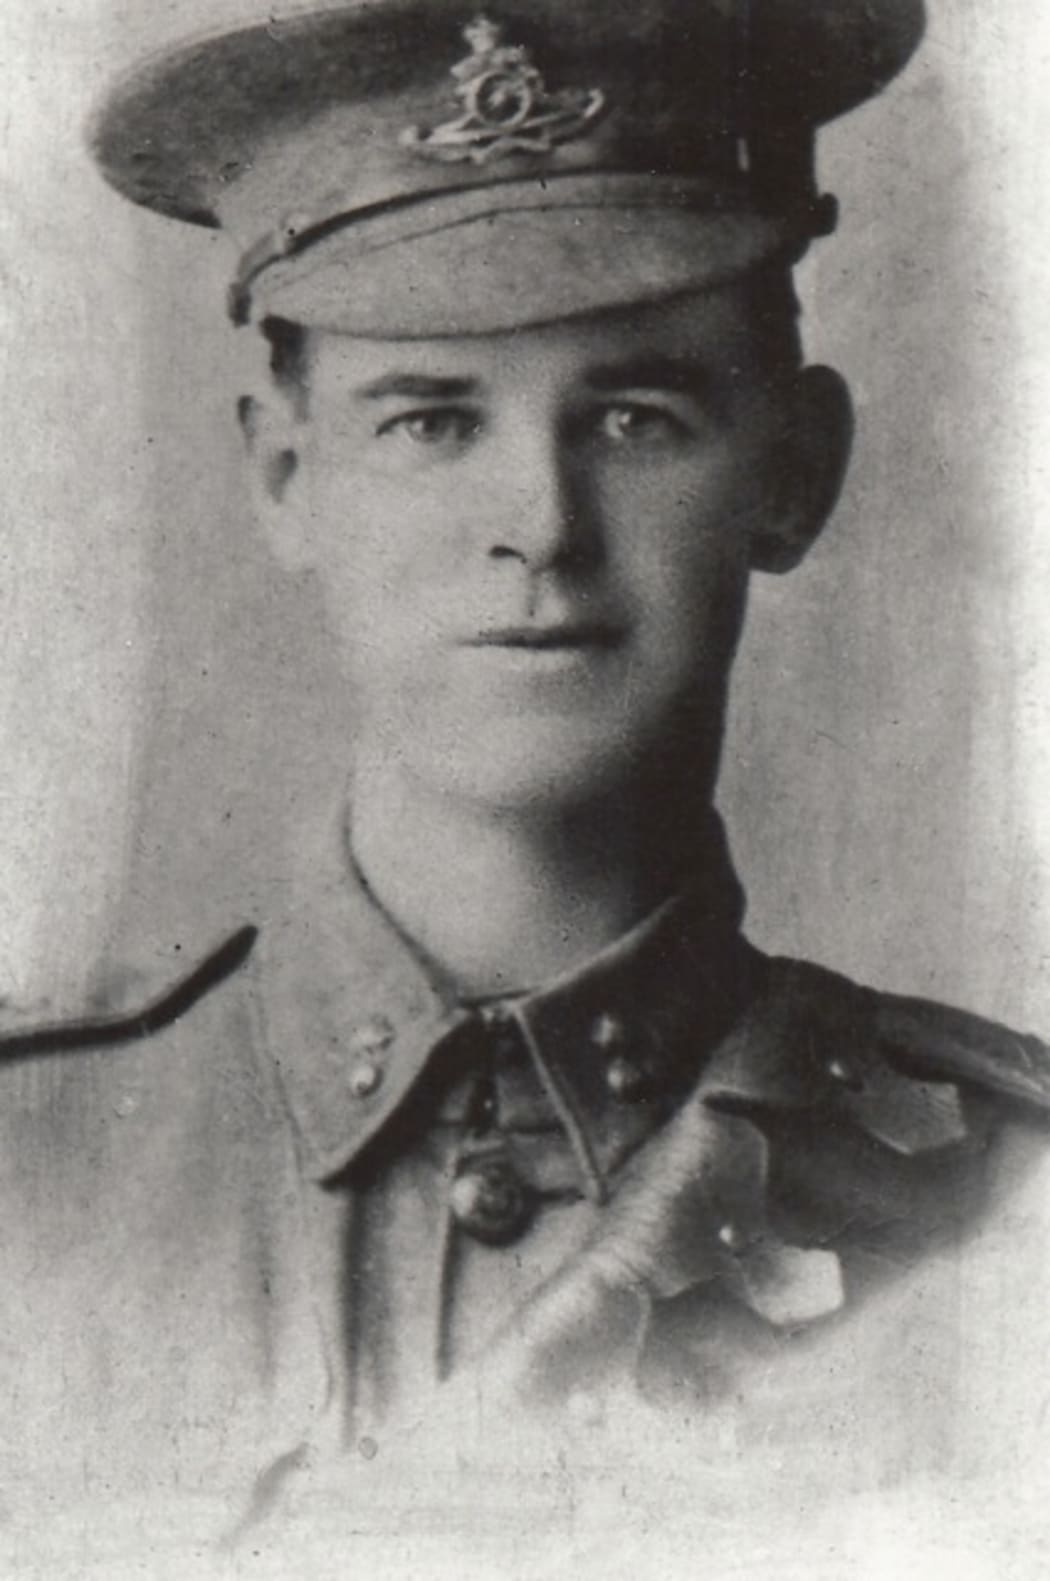 A sepia-tinted portrait of a man in military uniform